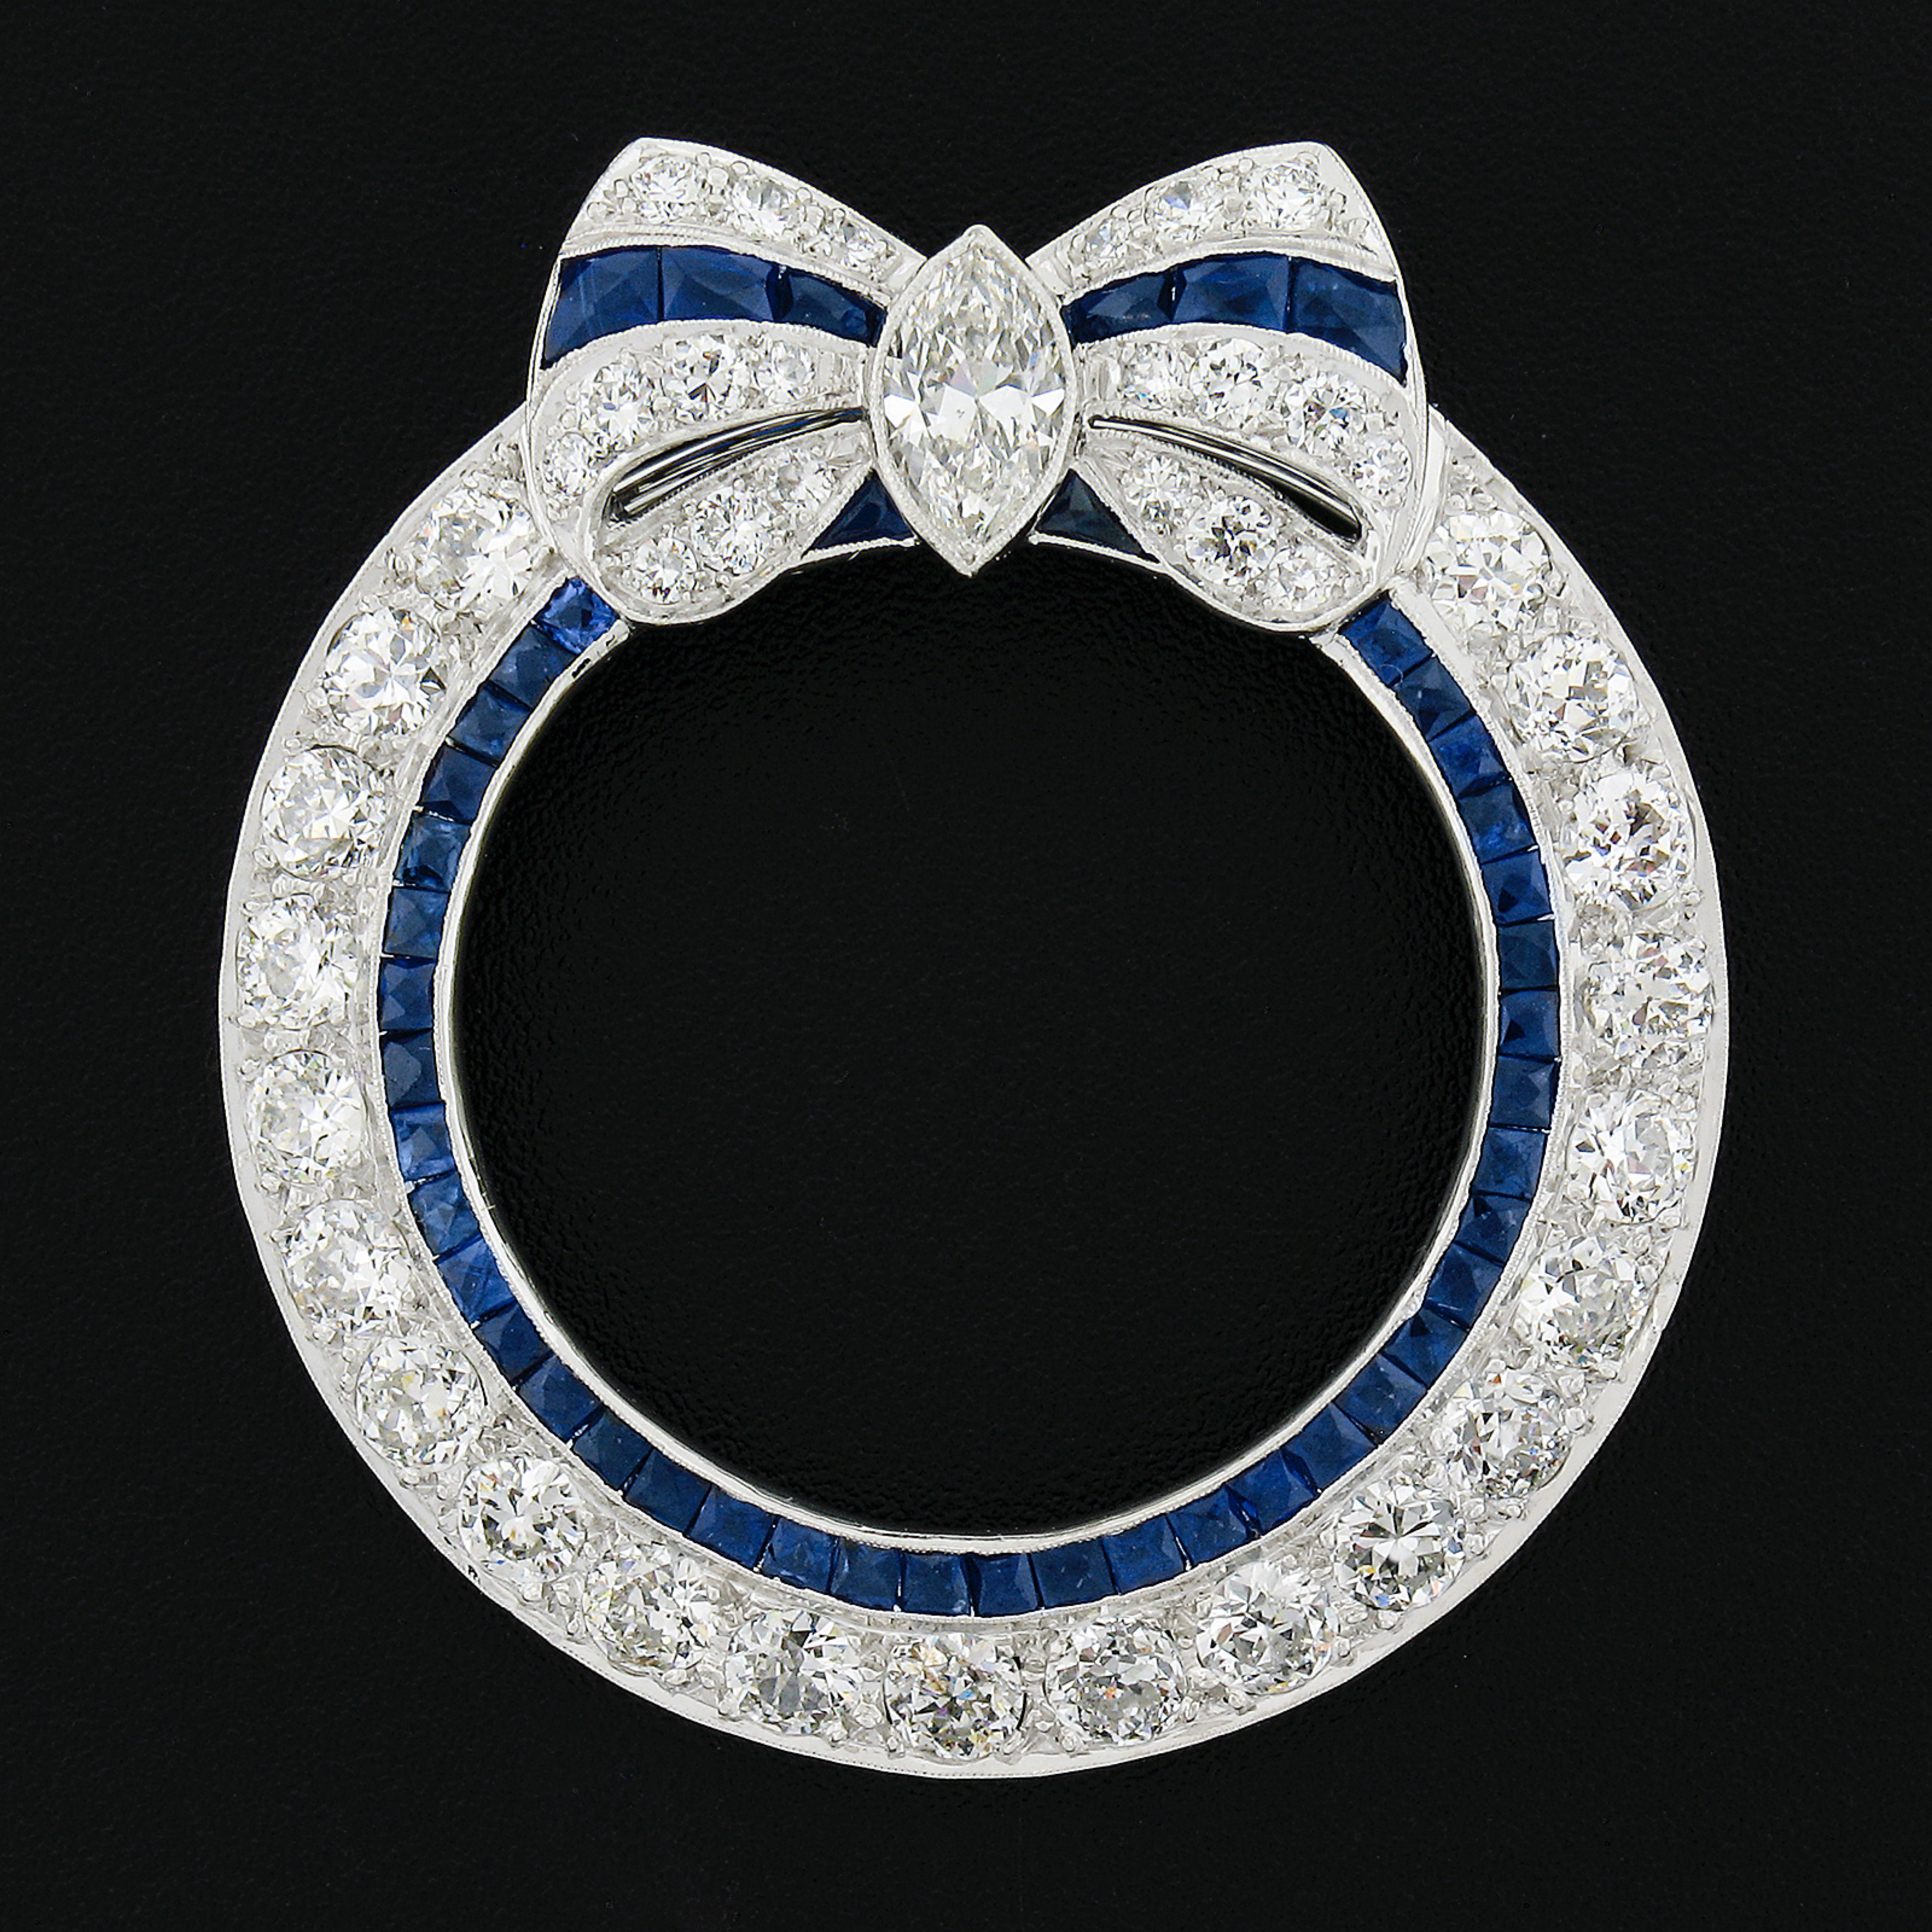 This breathtaking and large antique wreath brooch was crafted in solid platinum during the art deco period. The wreath is decorated with a beautiful bow design that is set with a large old marquise cut diamond at its center. The remailing of the bow